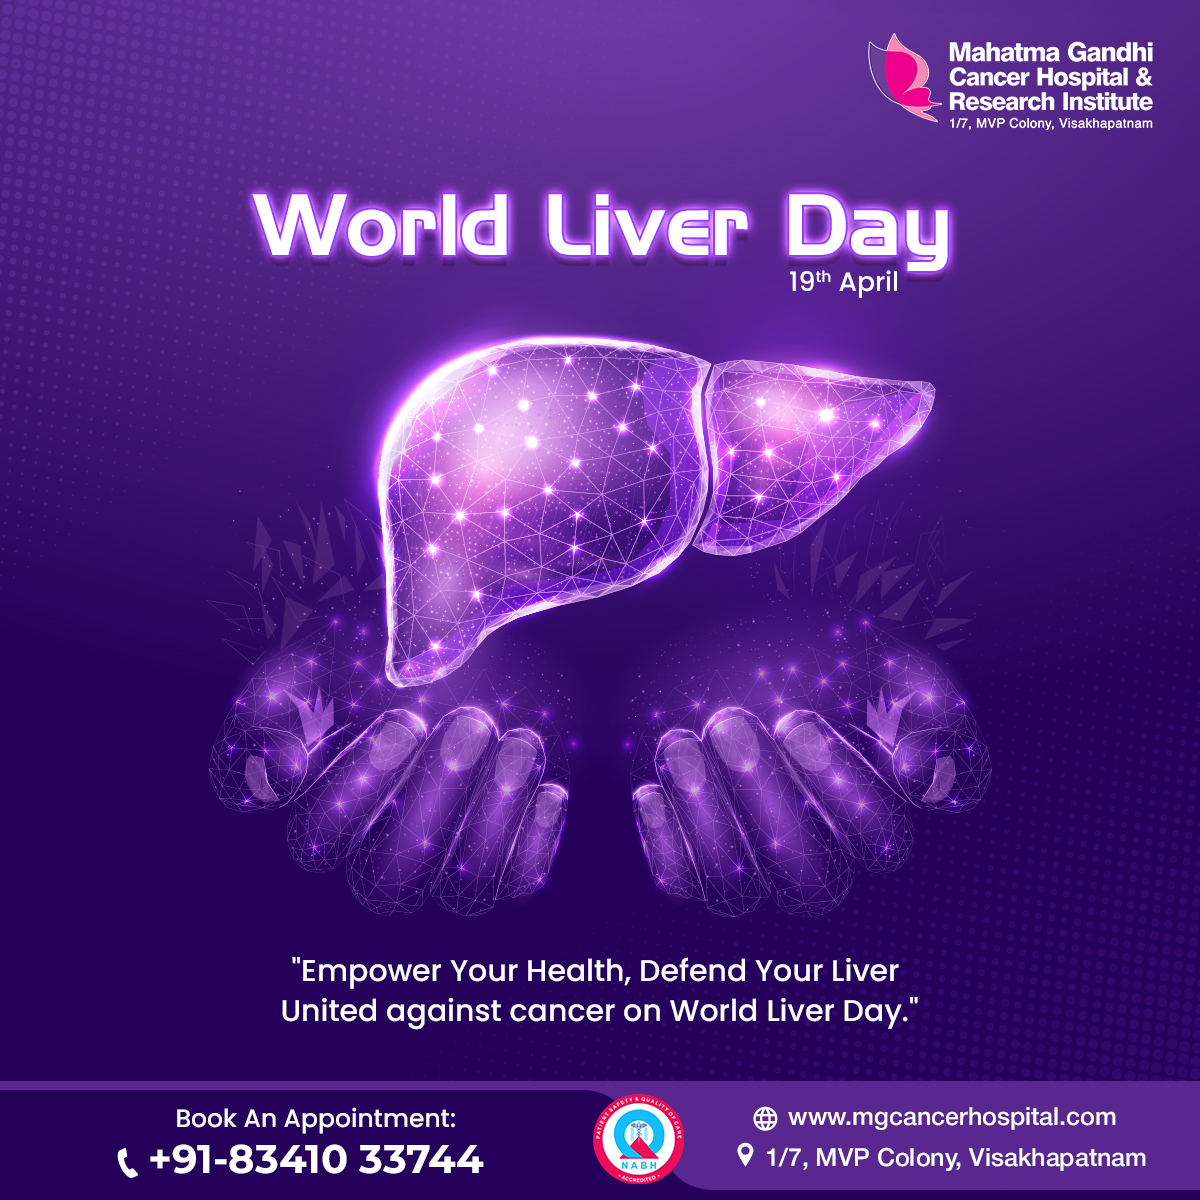 Guarding Your Liver, Protecting Your Life – World Liver Day with a pledge to cancer prevention. #WorldLiverDay #CancerCare #LiverHealth #LoveYourLiver #LiverAwareness #LiverDisease #FightLiverDisease #LiverCare #HealthyLiver #LiverWellness #ProtectYourLive #MGCHRI…